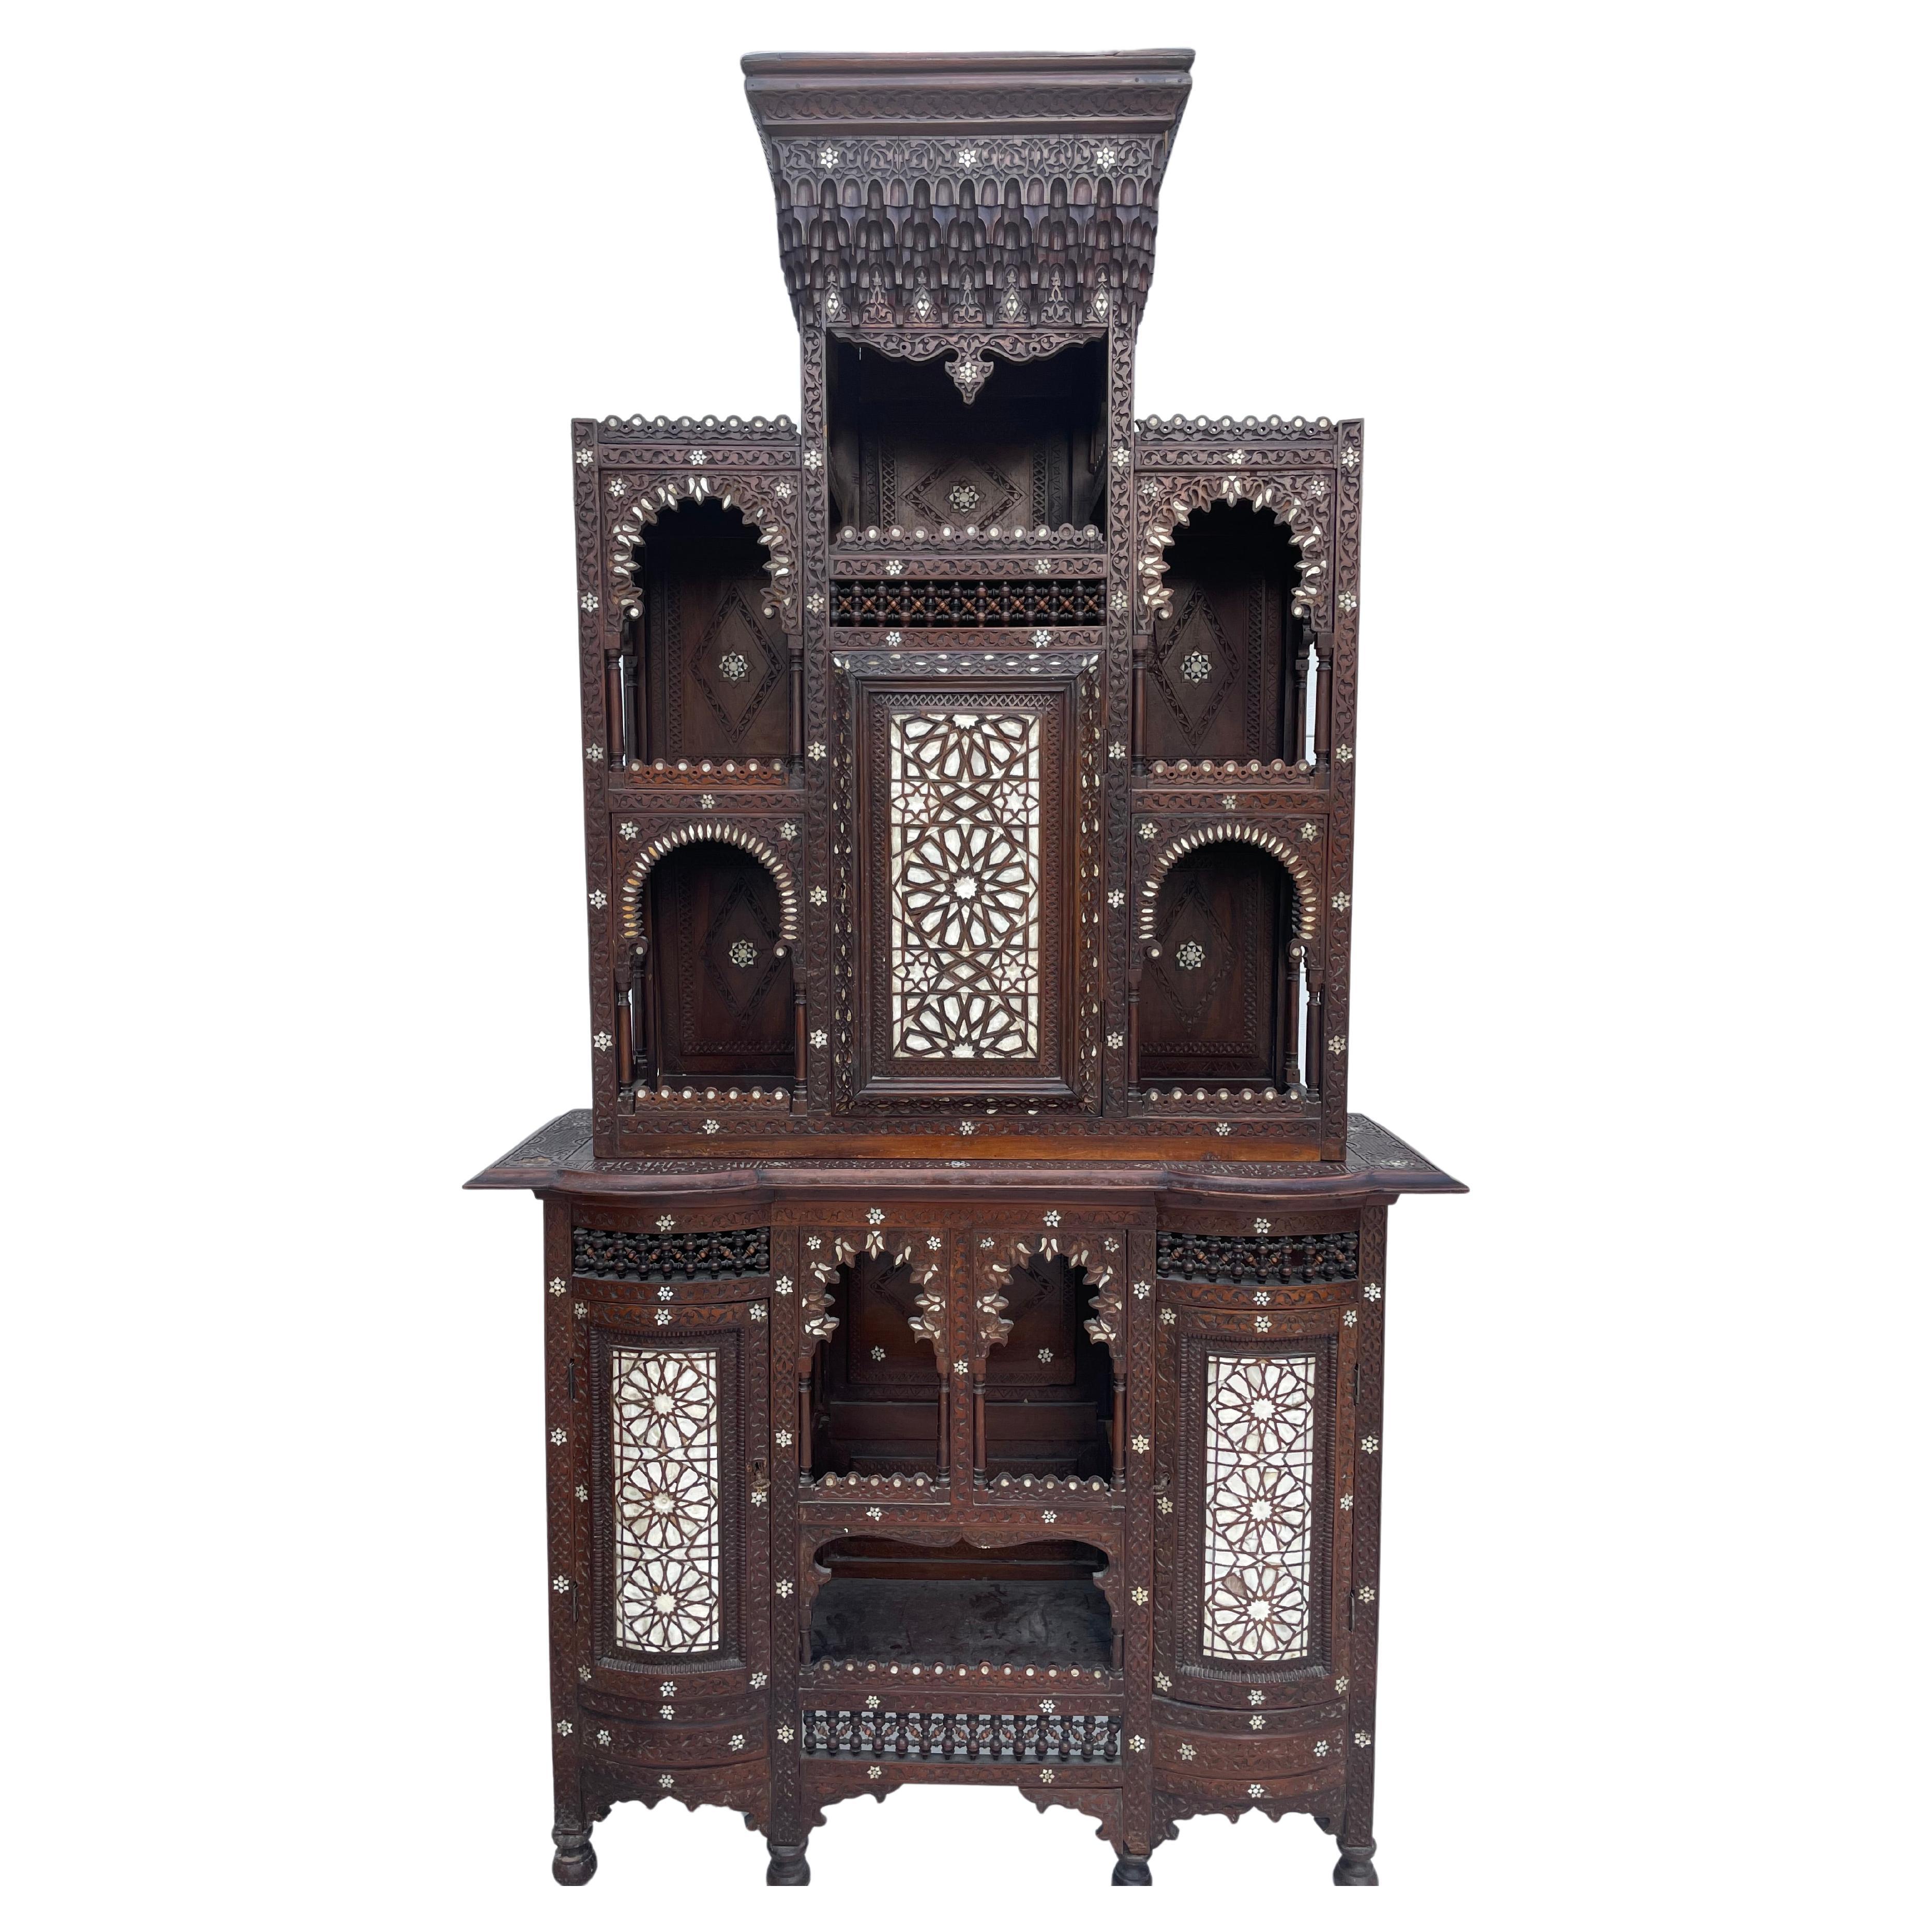 Exeptionel Syrian cabinet from the end of the 19th century. The cabinet is in two parts. Moorish decors has inlay of mother-of-pearl. To be noted, shortages and restorations of the time and age. The cabinet remains spectacular and decorative. Rare